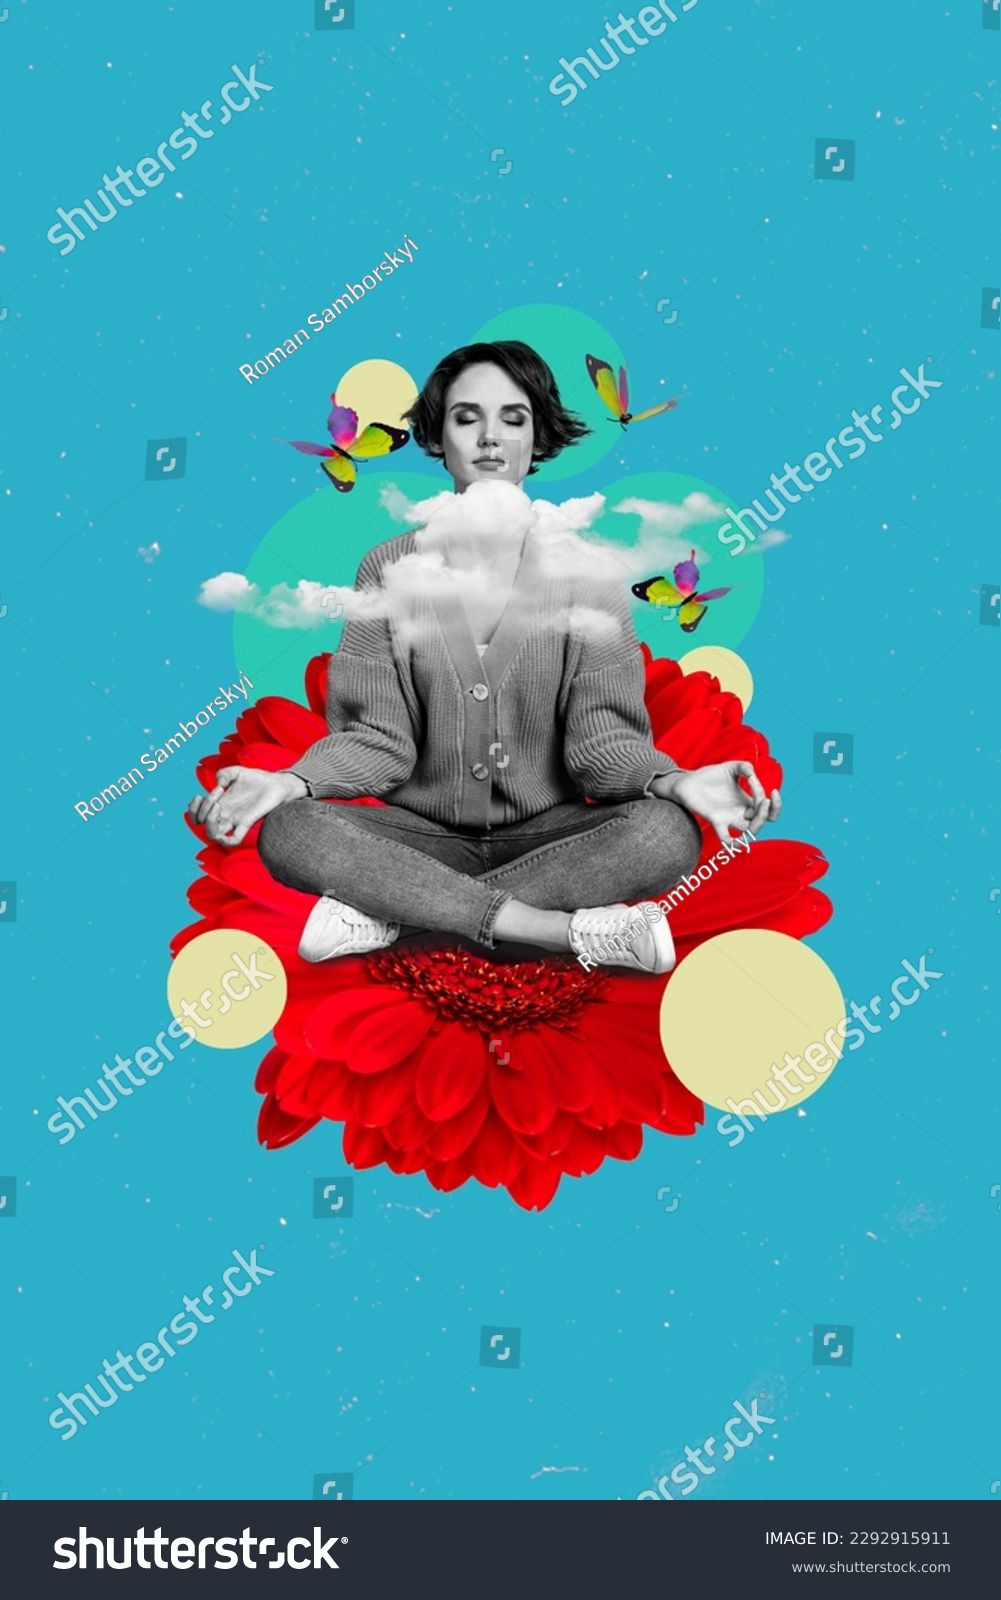 Vertical collage image artwork illustration of pretty girl sitting relaxing showing om symbol fly dreams blue color painting background #2292915911